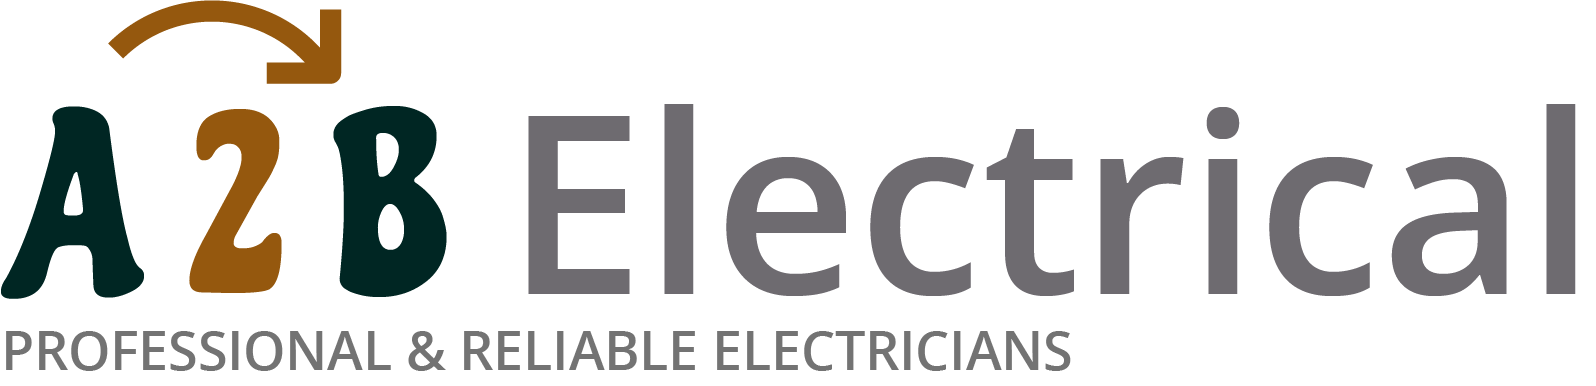 If you have electrical wiring problems in Neston, we can provide an electrician to have a look for you. 